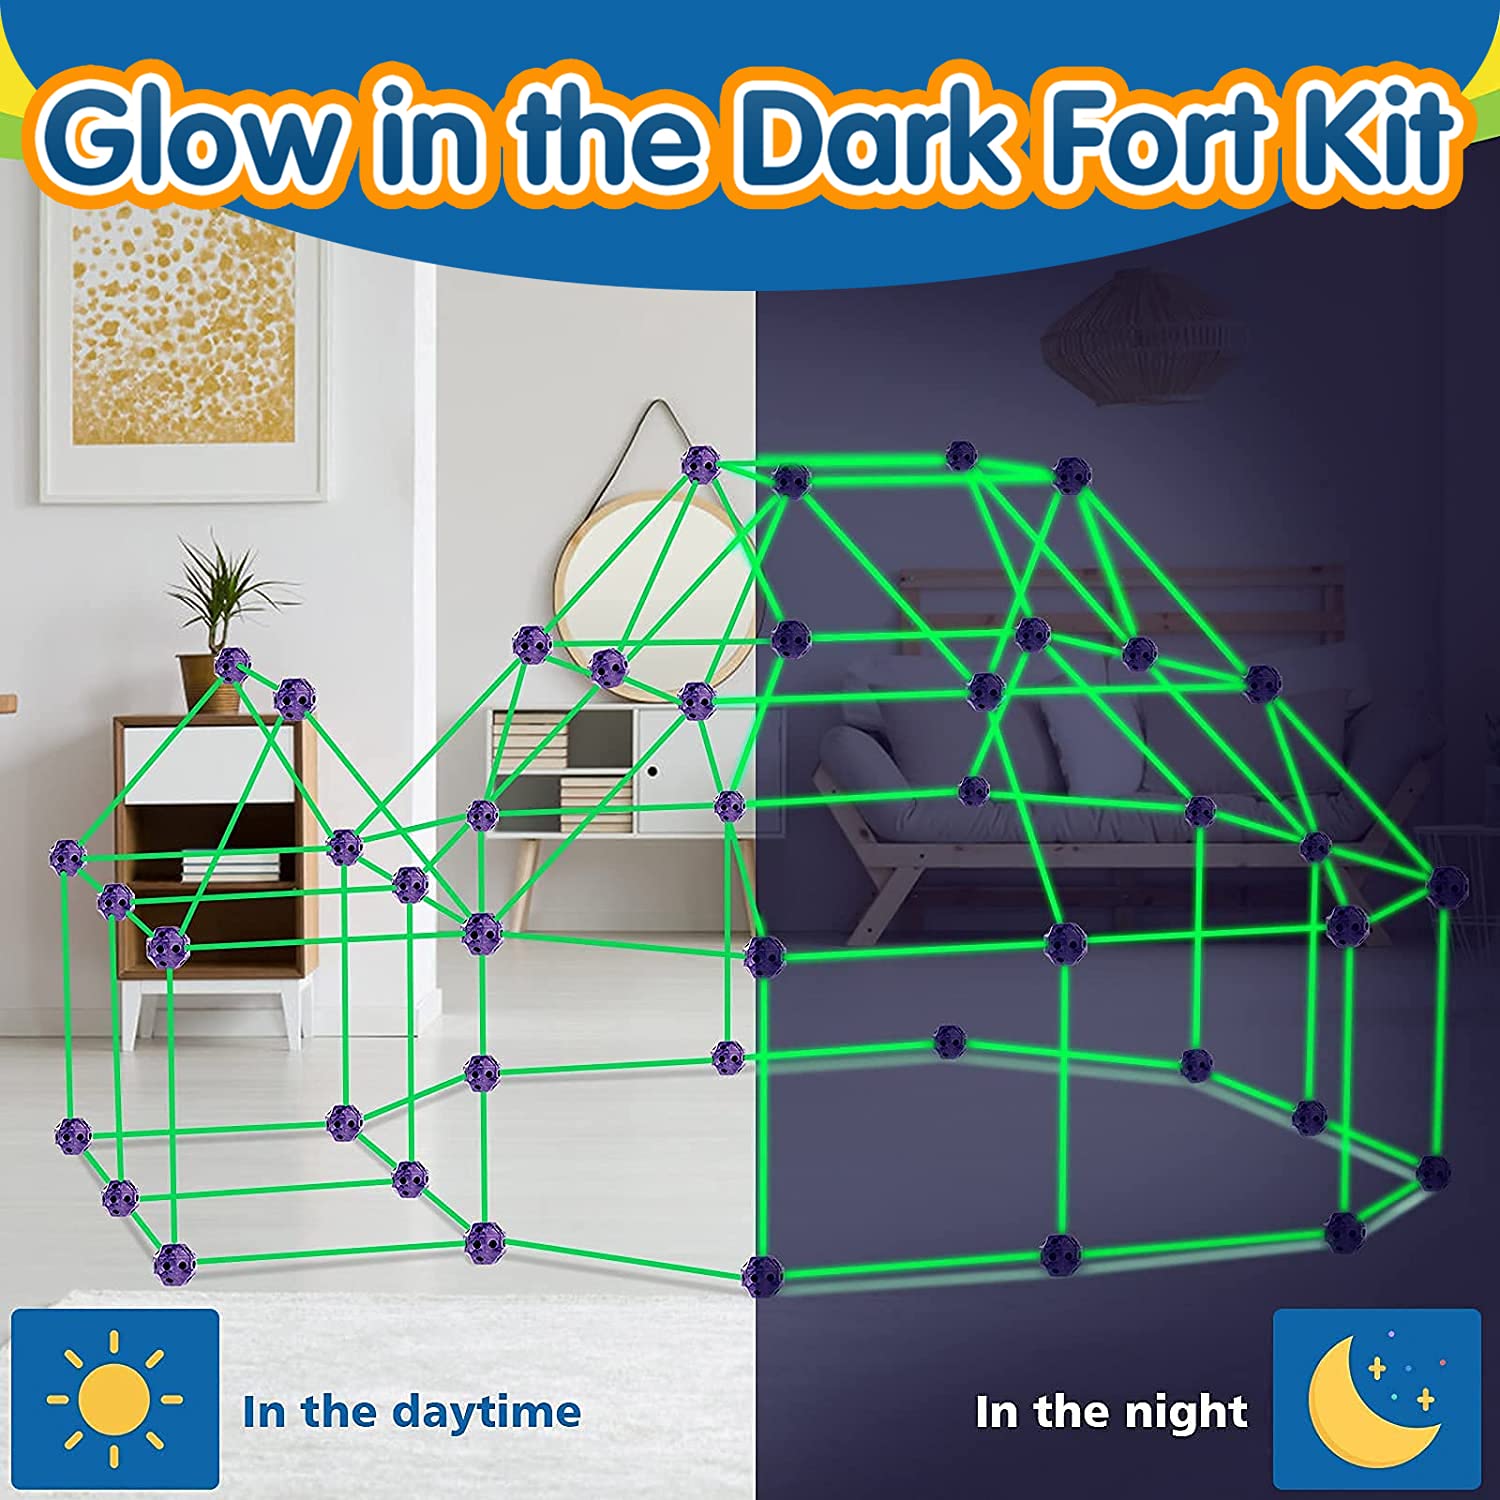 150 Pcs Glow Fort Building Kits for Kids, Creative Toys Forts for 3-14 Years Old Tent Construction Forts, Ultimate Forts Builder DIY Building Tent Learning Toy for Indoor & Outdoor Teepee Kit